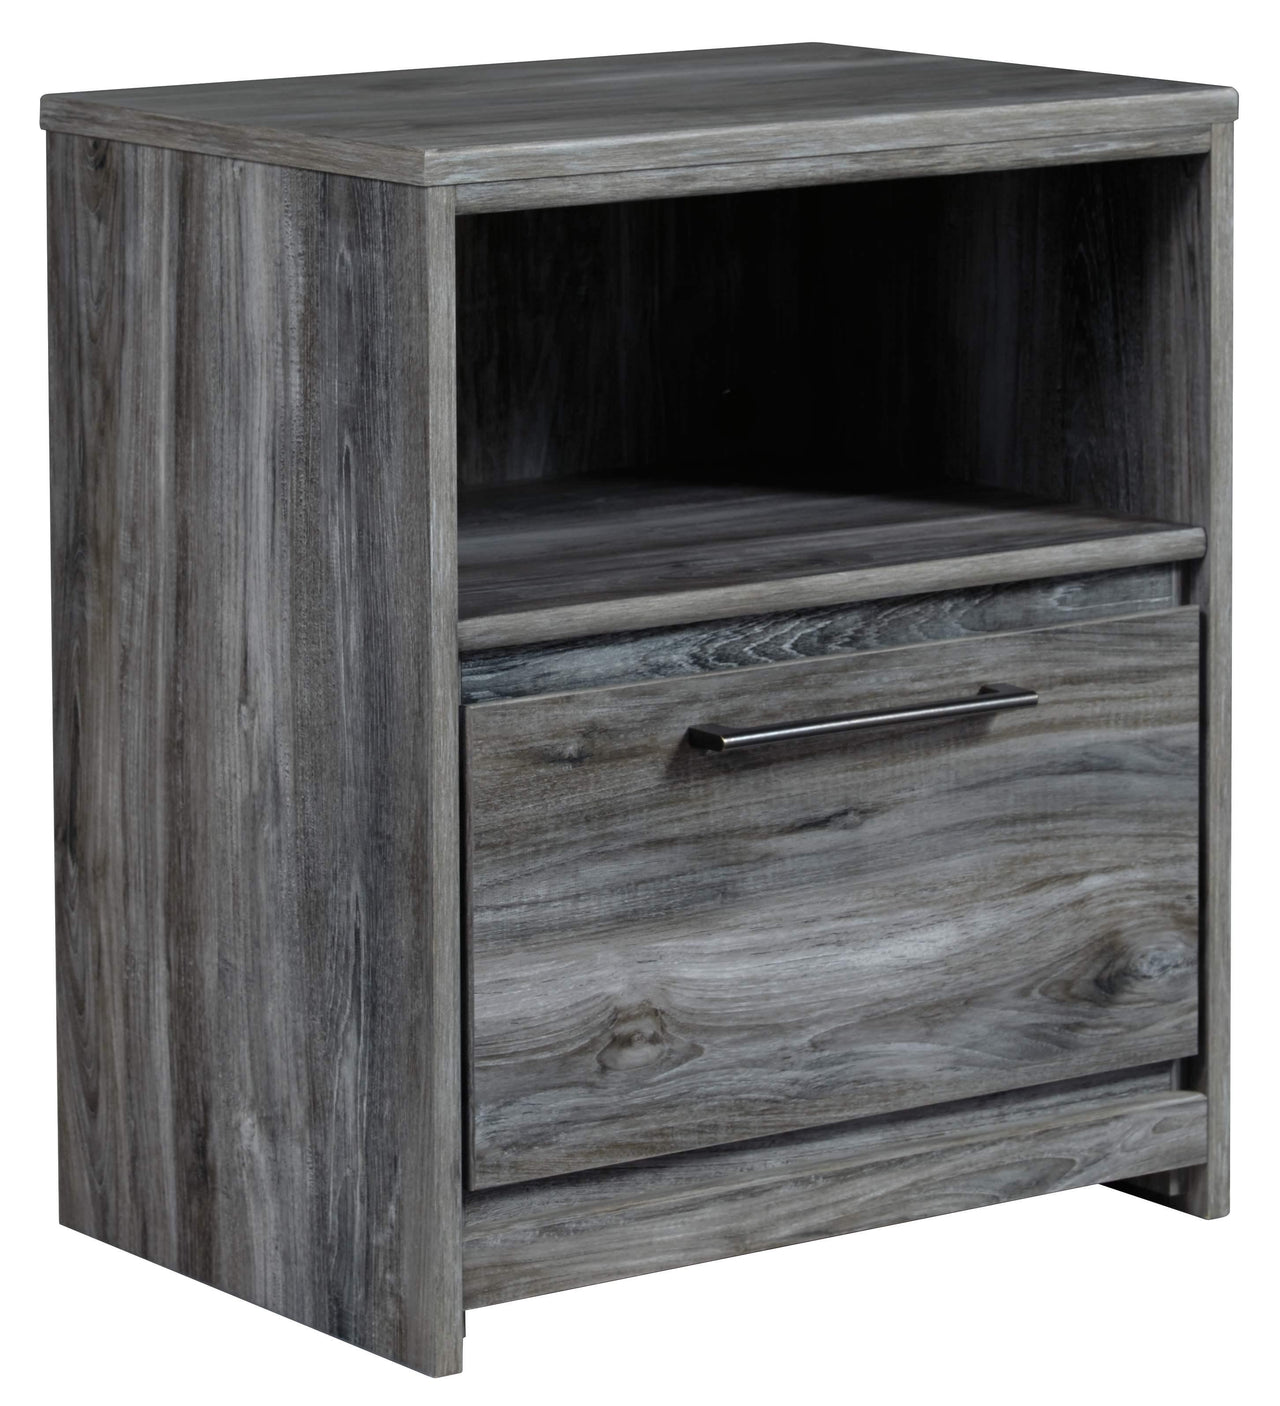 Baystorm - Gray - One Drawer Night Stand Tony's Home Furnishings Furniture. Beds. Dressers. Sofas.